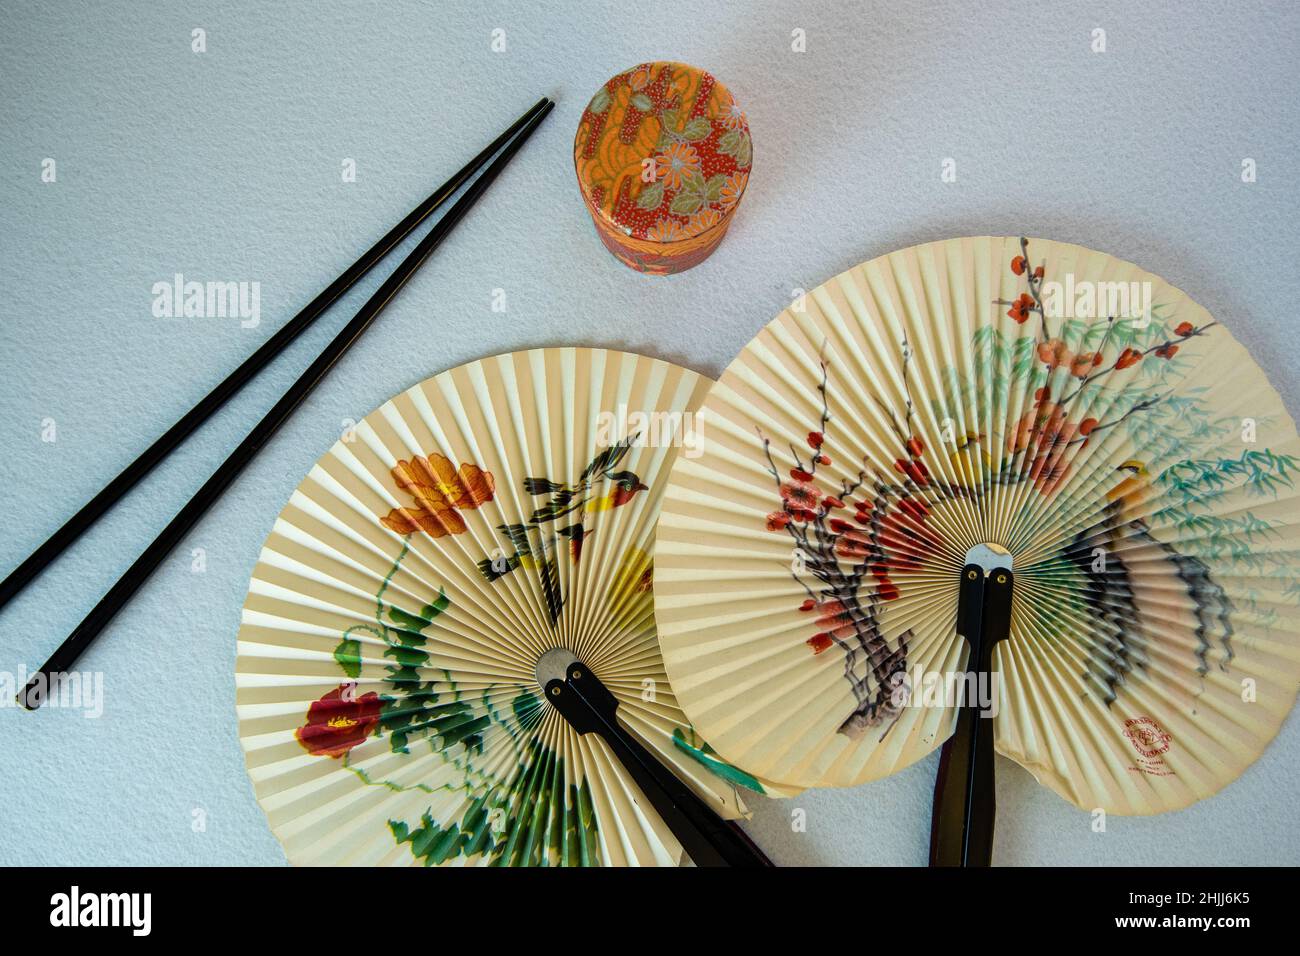 paper fan from far east with chop sticks Stock Photo